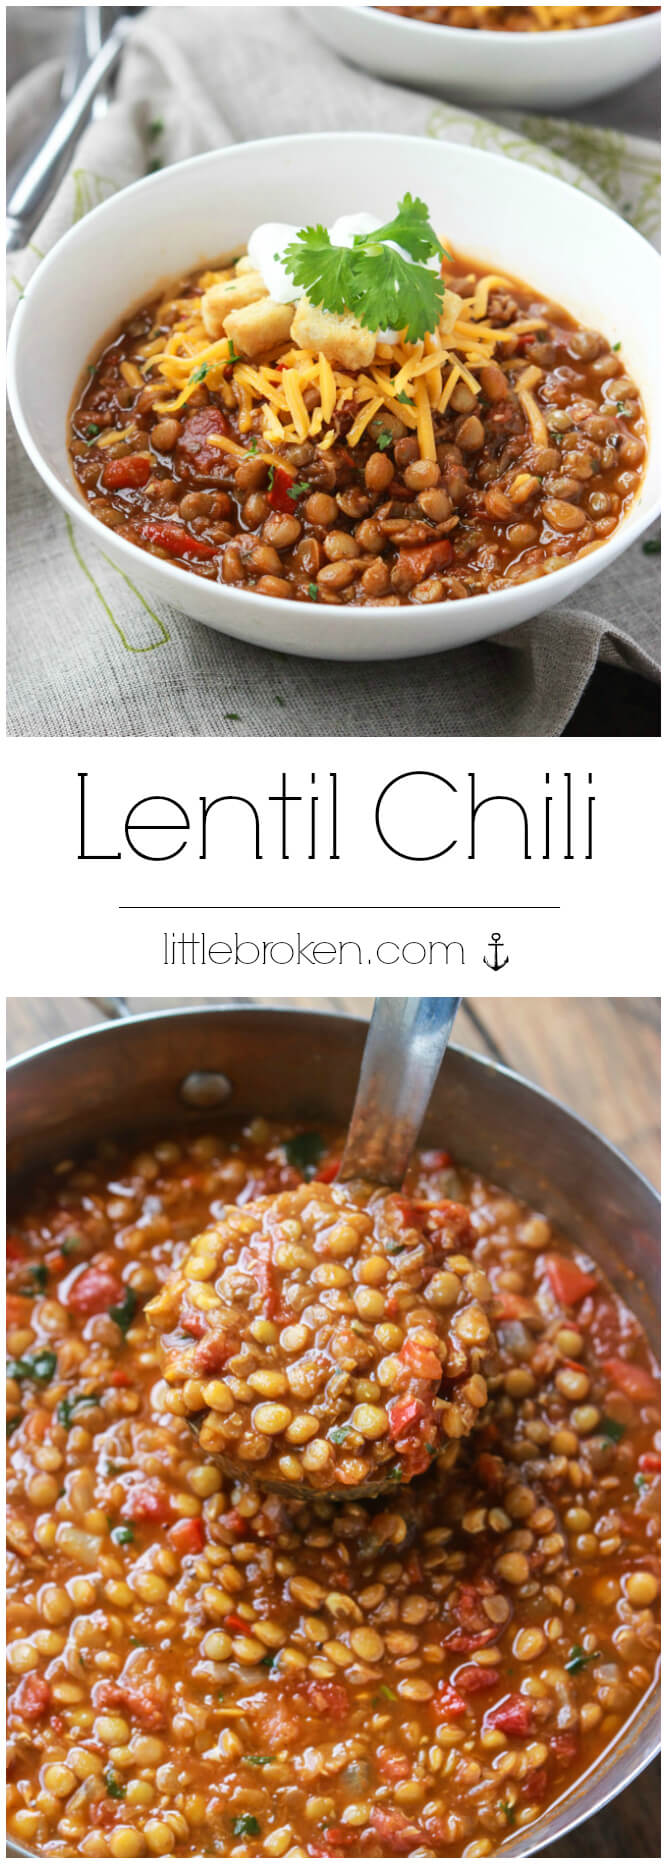 Healthy chunky chili made with lentils instead of meat but tastes just like your favorite meat chili! Gluten free, vegan, vegetarian | littlebroken.com @littlebroken 